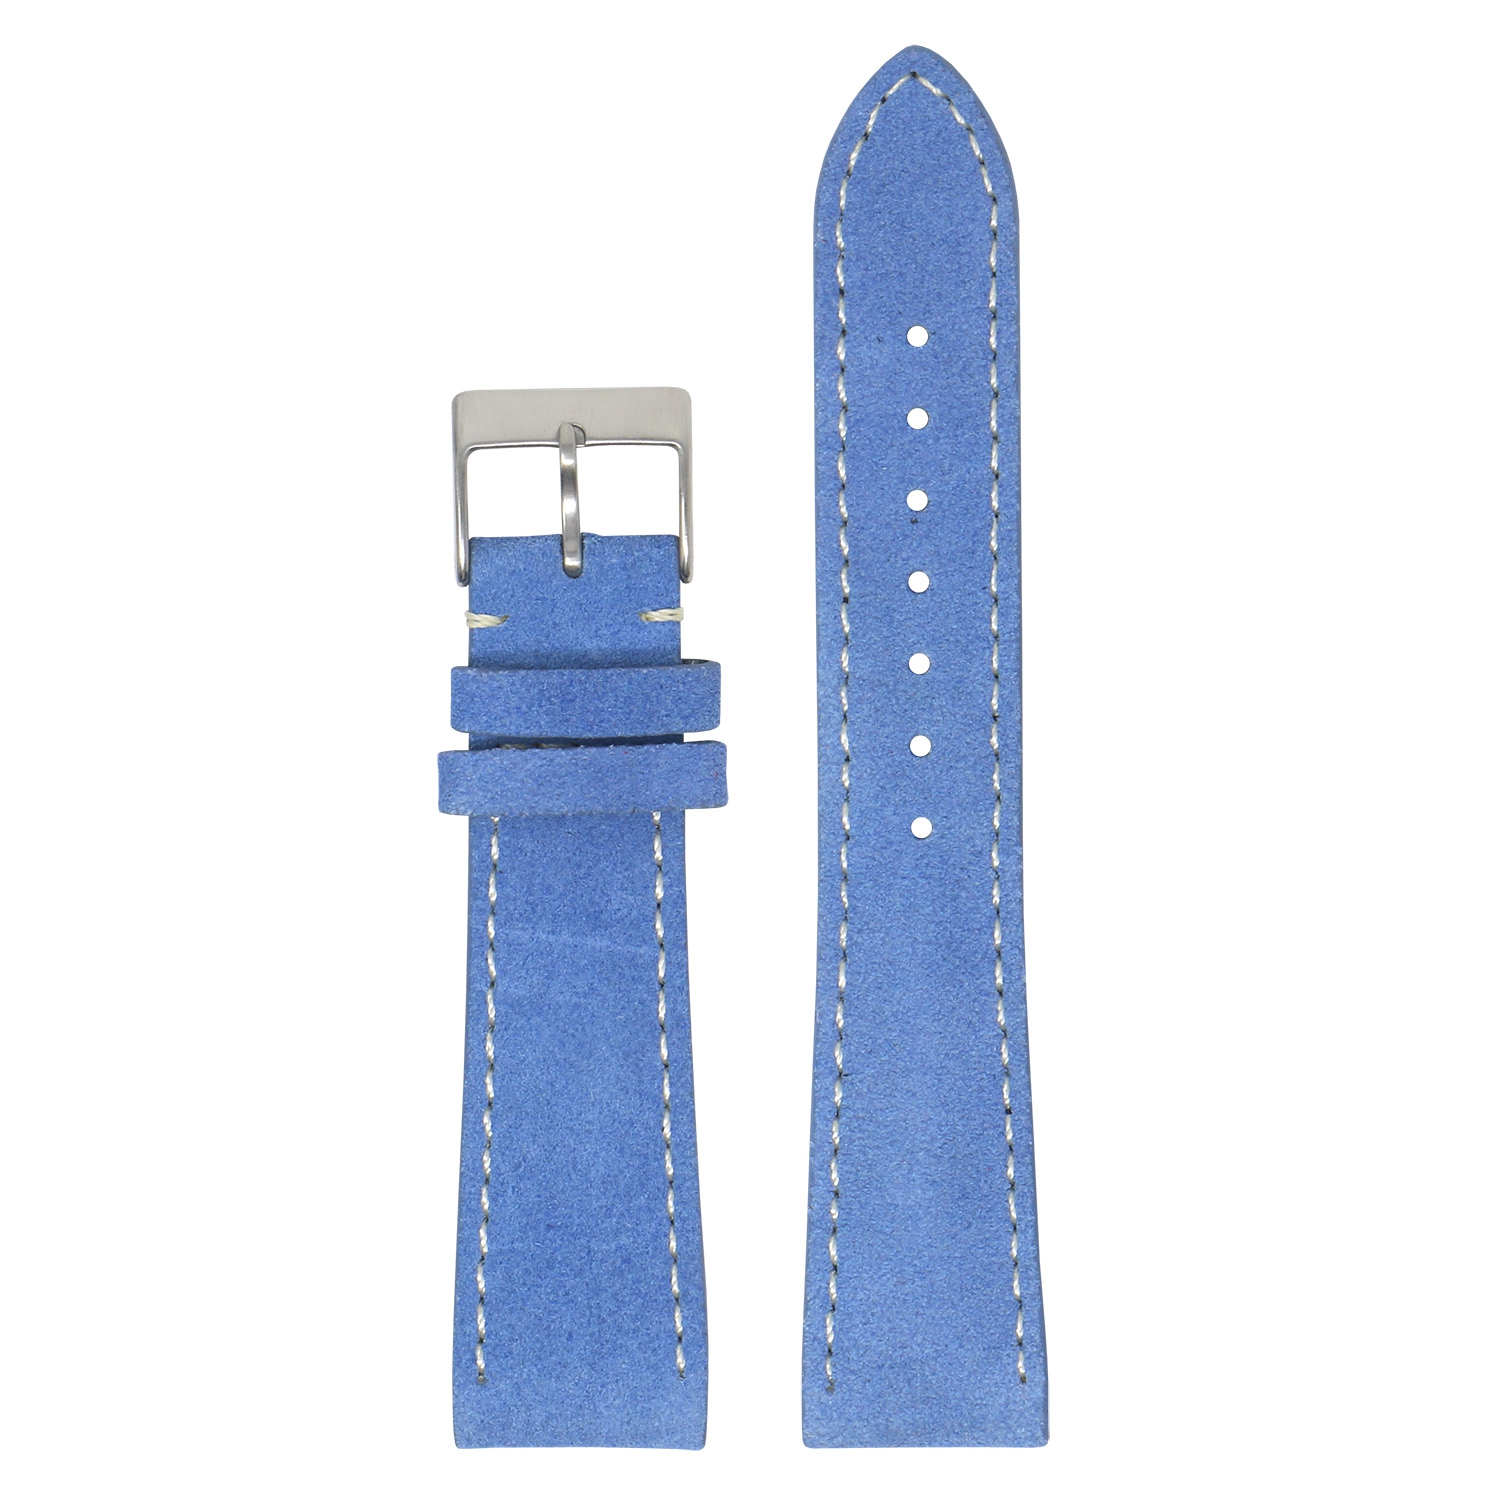 StrapsCo Classic Suede Watch Band Strap (Short, Standard, Long) for Fitbit Charge 4 & Charge 3 - Long - Light Blue